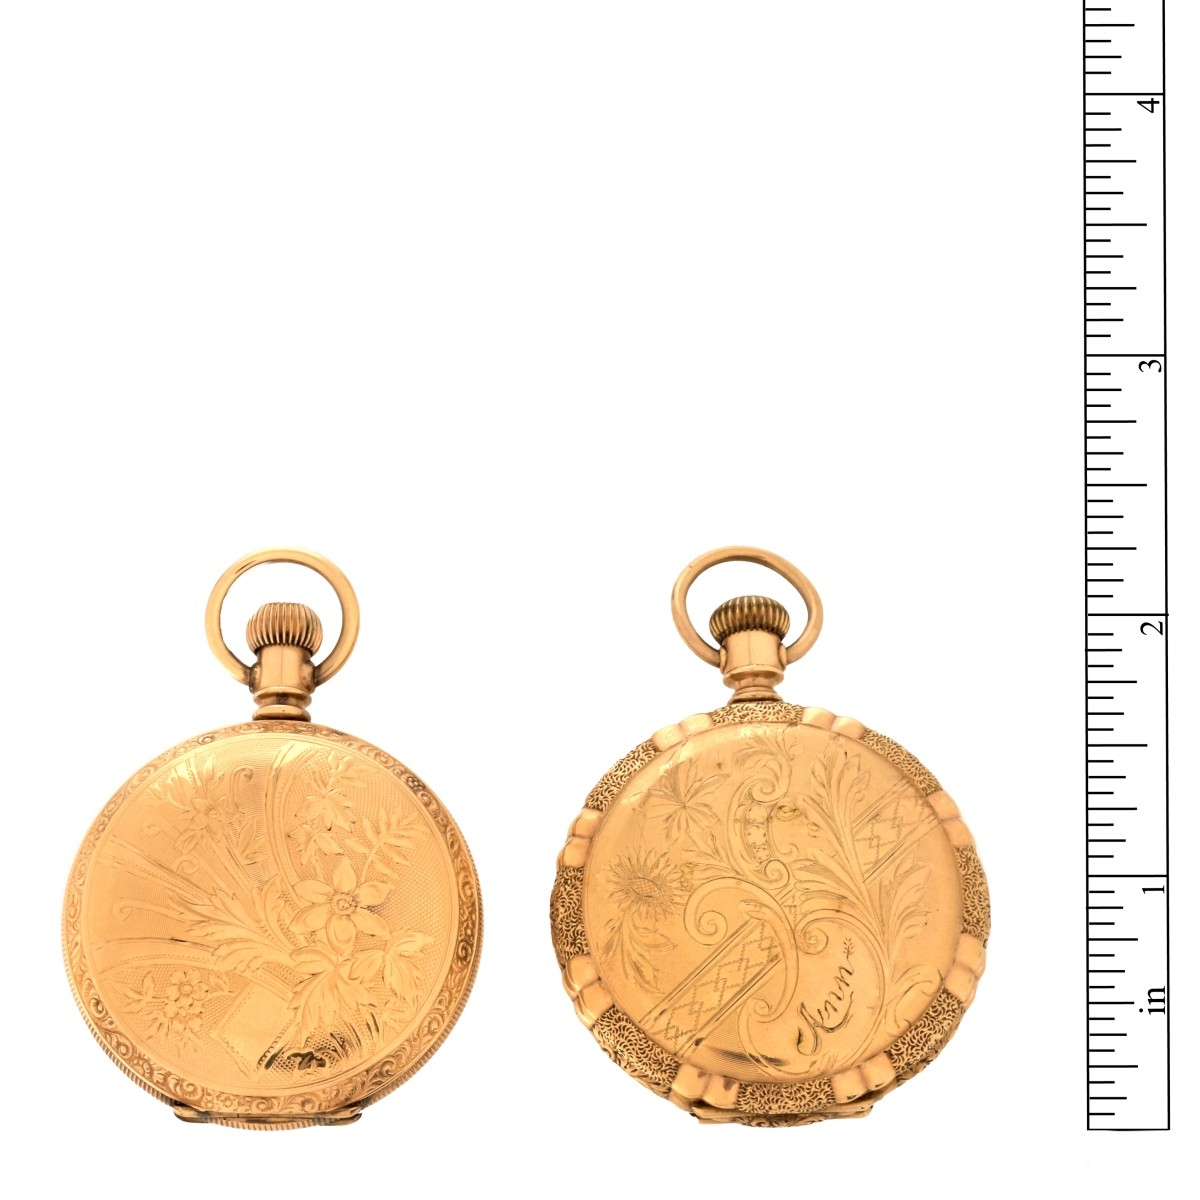 Antique Gold Filled Pocket Watches